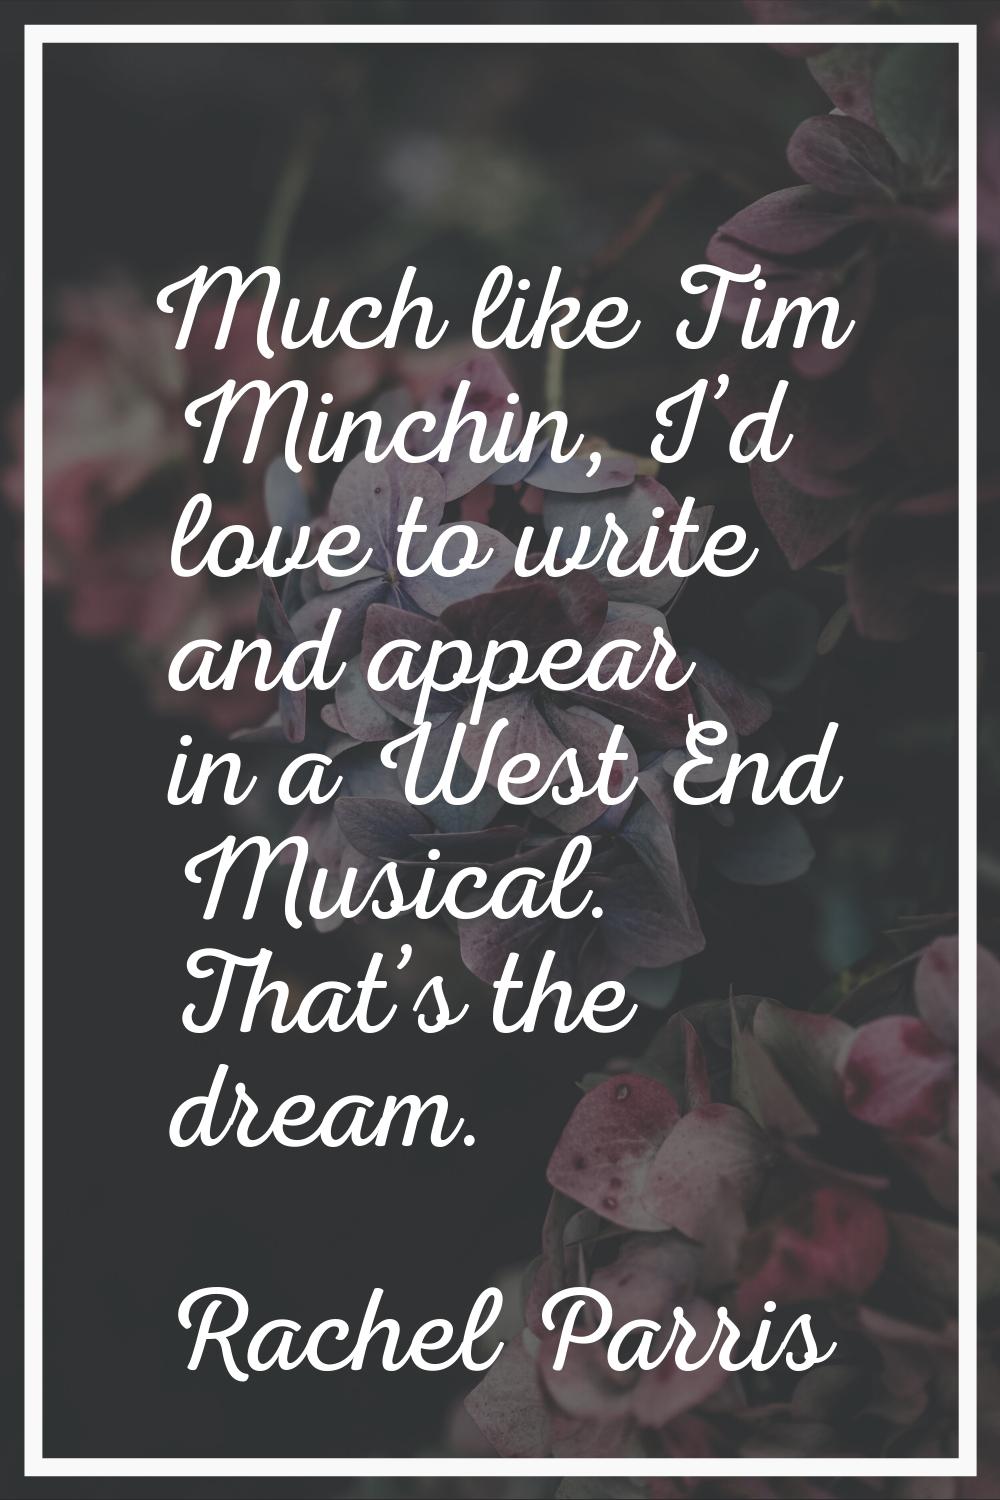 Much like Tim Minchin, I’d love to write and appear in a West End Musical. That’s the dream.